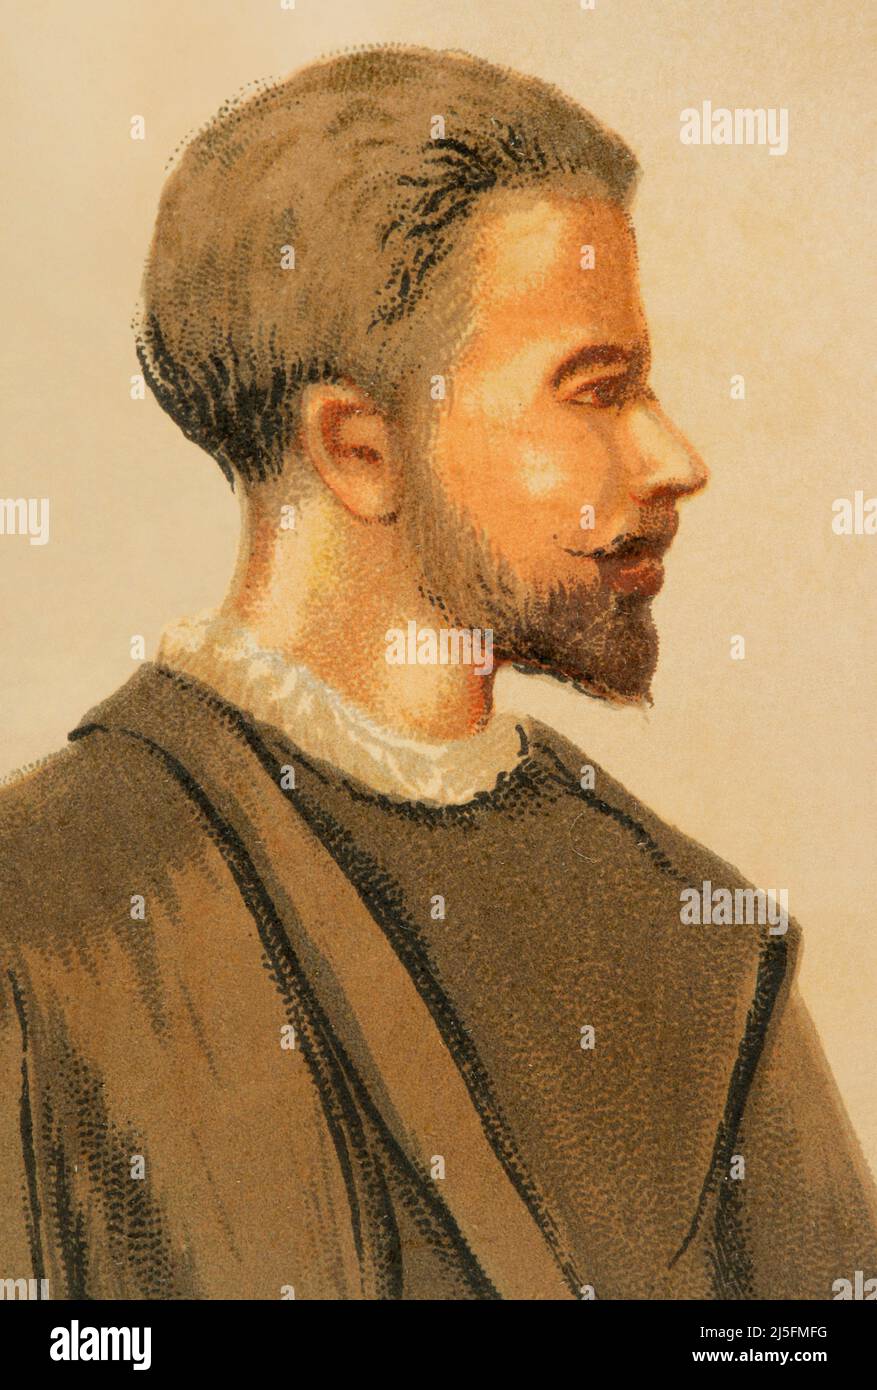 Philipp Melanchthon (1497-1560). German religious reformer. Portrait. Chromolithography. Historia Universal, by César Cantú. Volume VIII. Published in Barcelona, 1886. Stock Photo